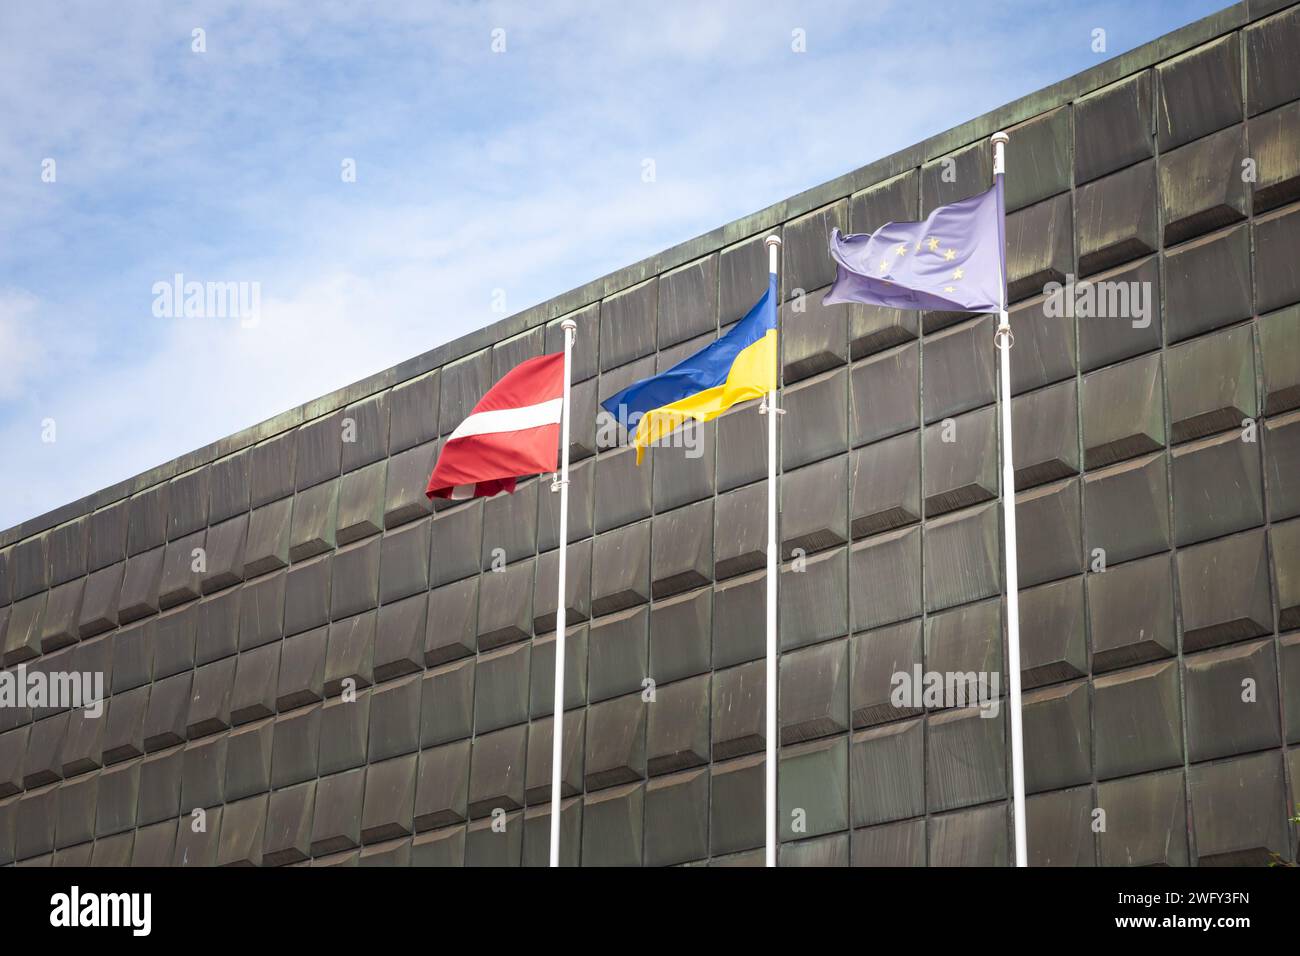 Picture of the ukrainian and Latvian flags waiving together in Riga, celebrating the solidarity between Latvia and Ukraine in the war against russia. Stock Photo